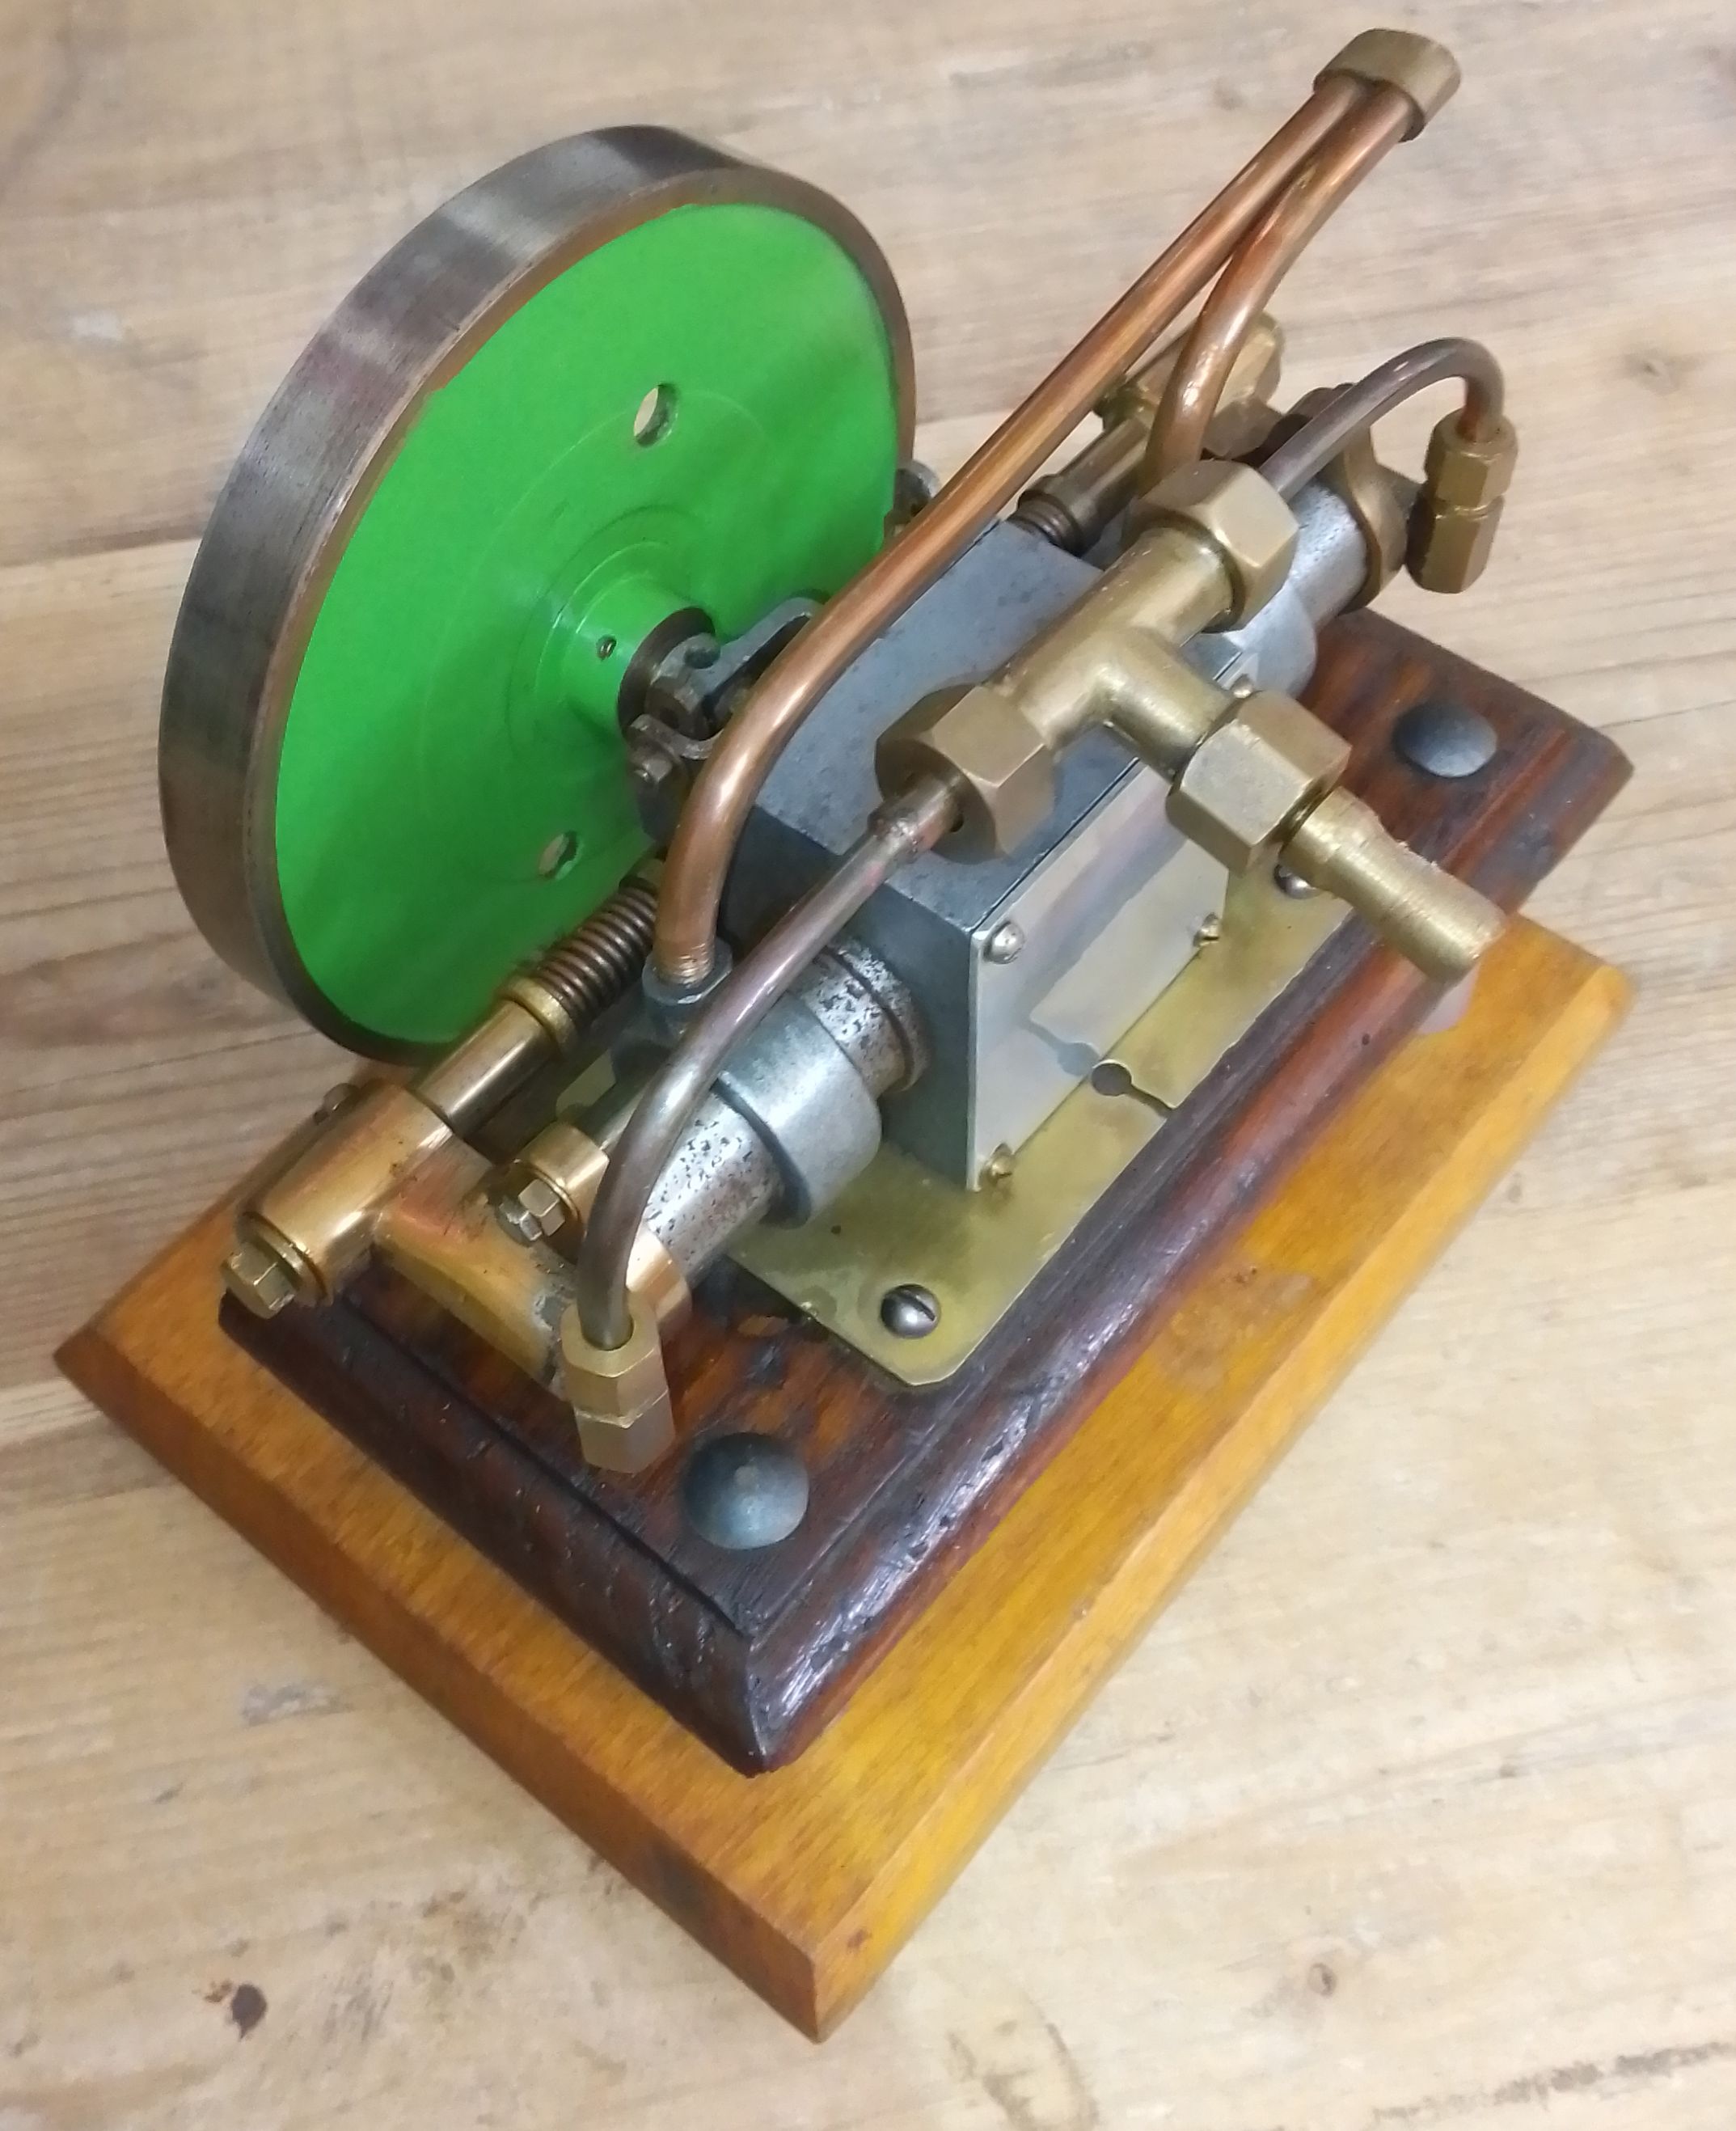 A scratch built live steam horizontal opposed cycler engine with wooden case